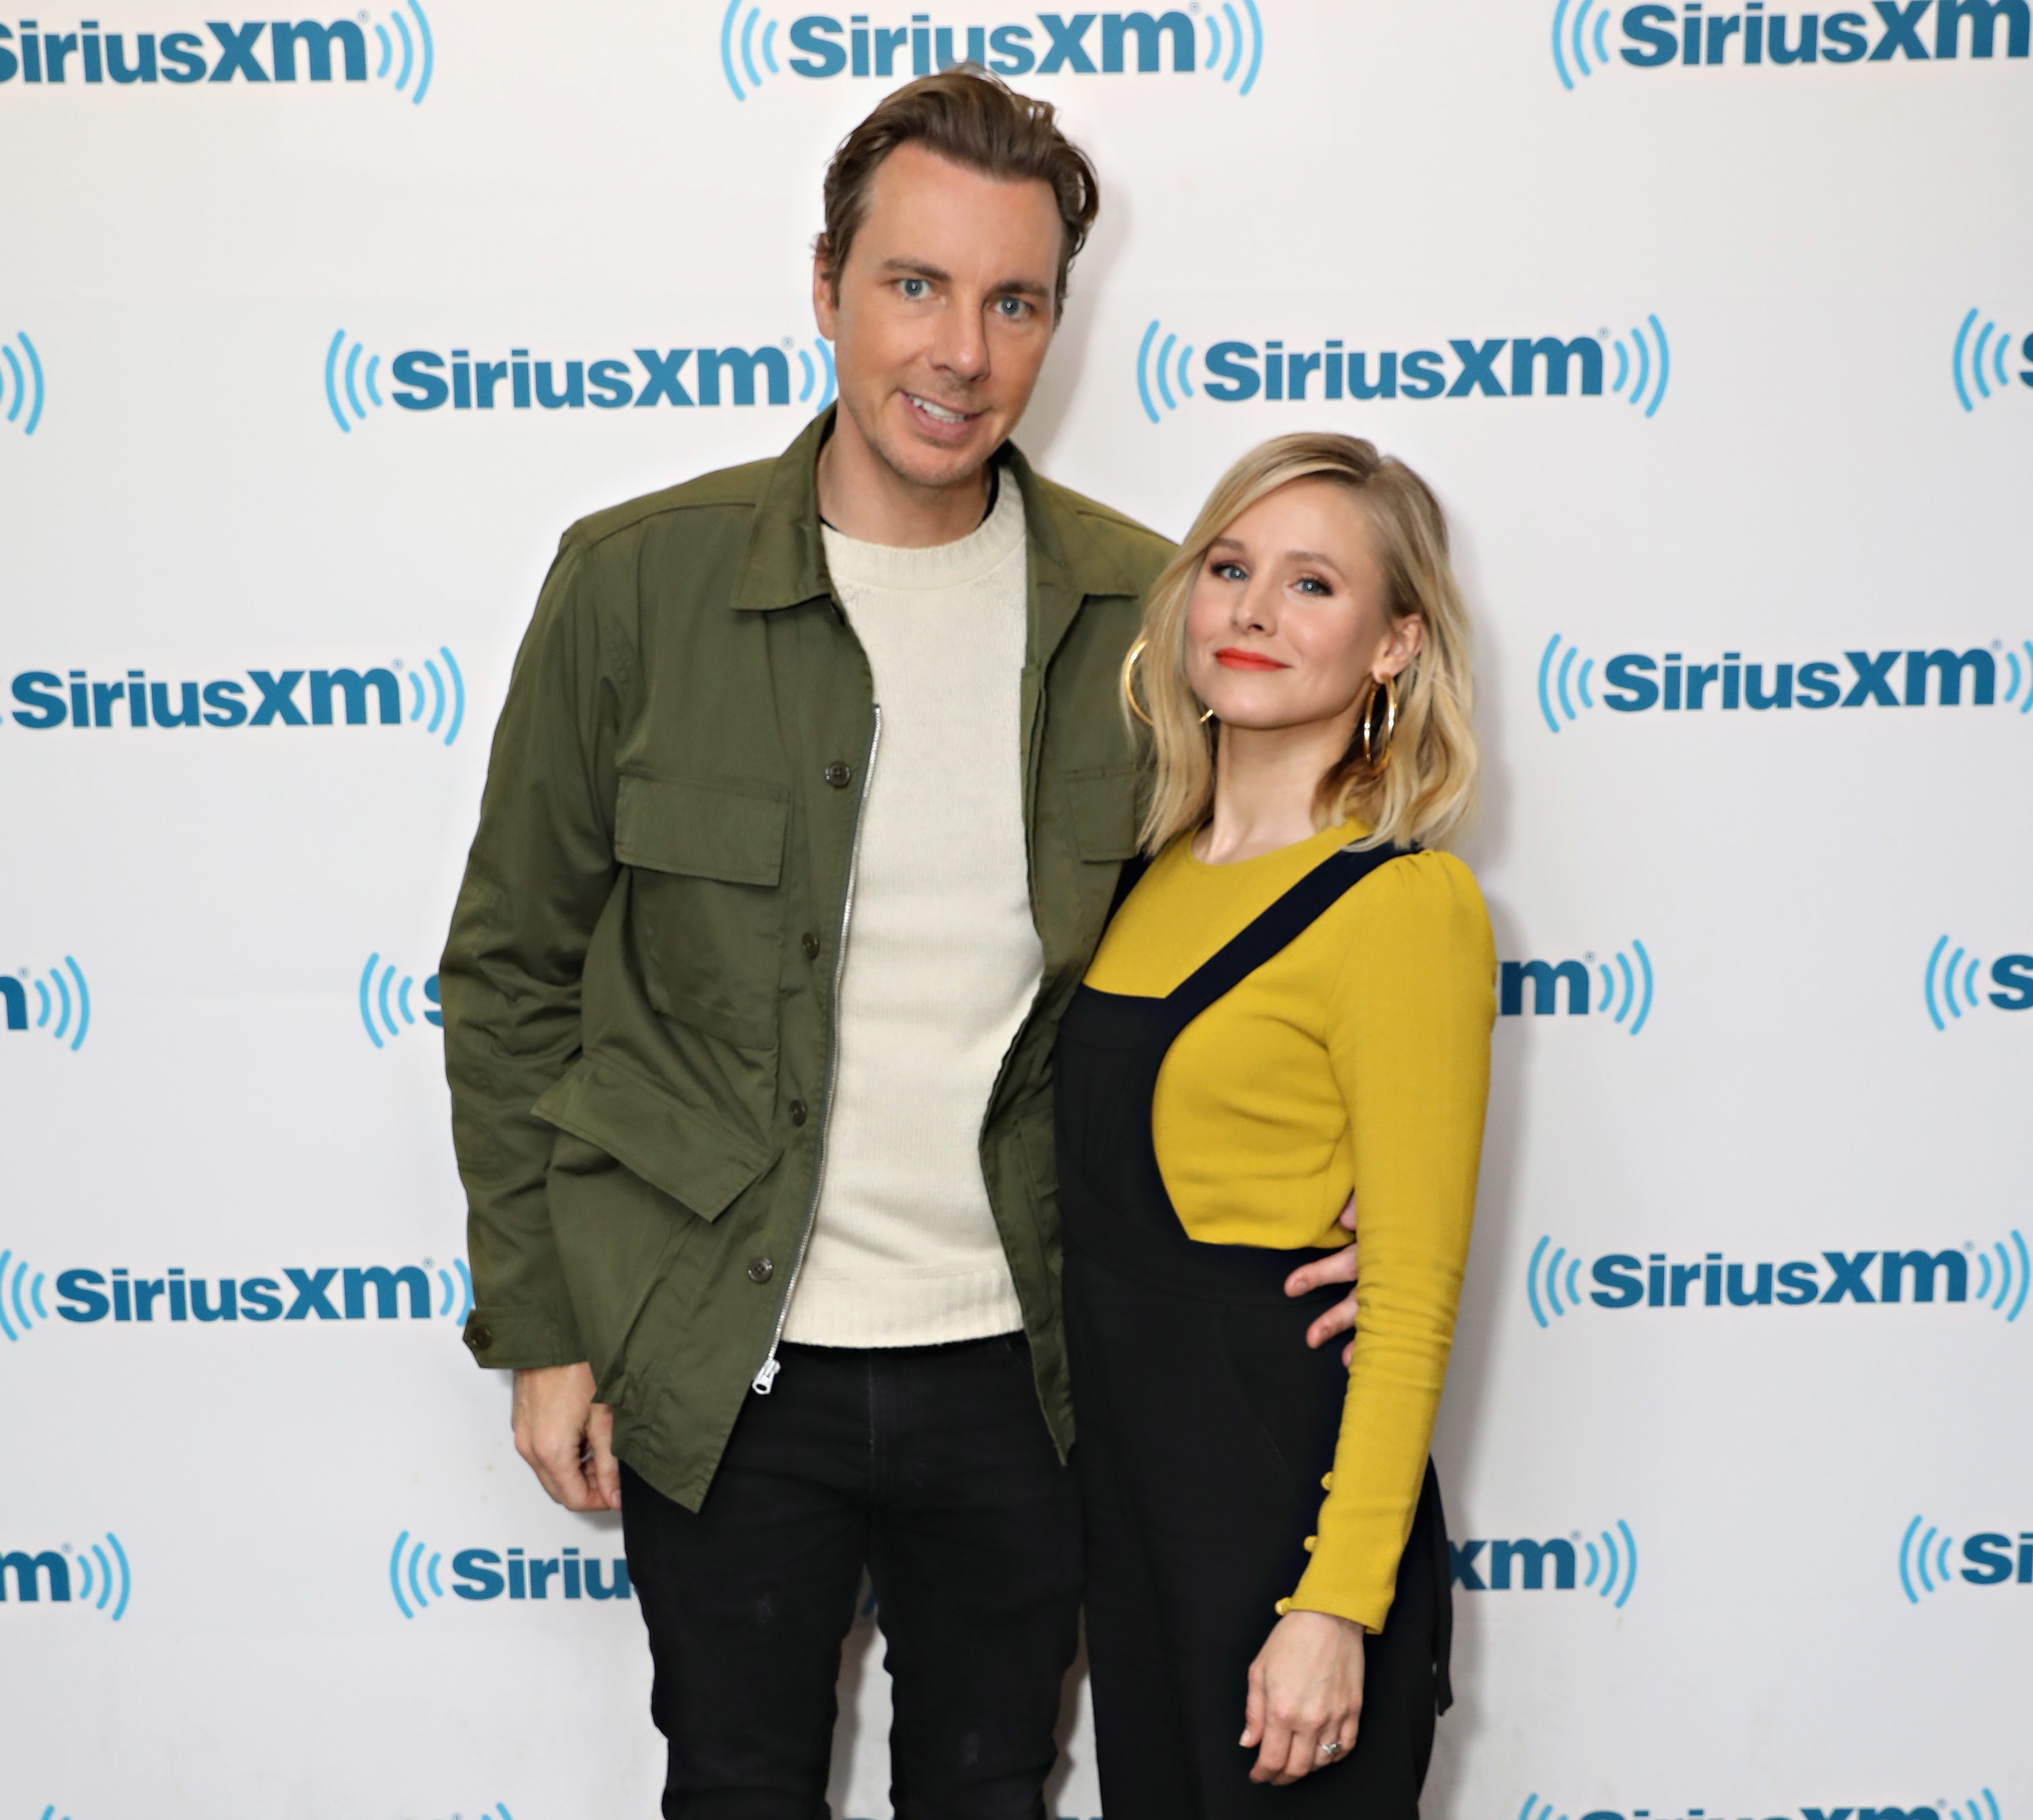 Dax Shepard and Kristen Bell on the red carpet at a media event